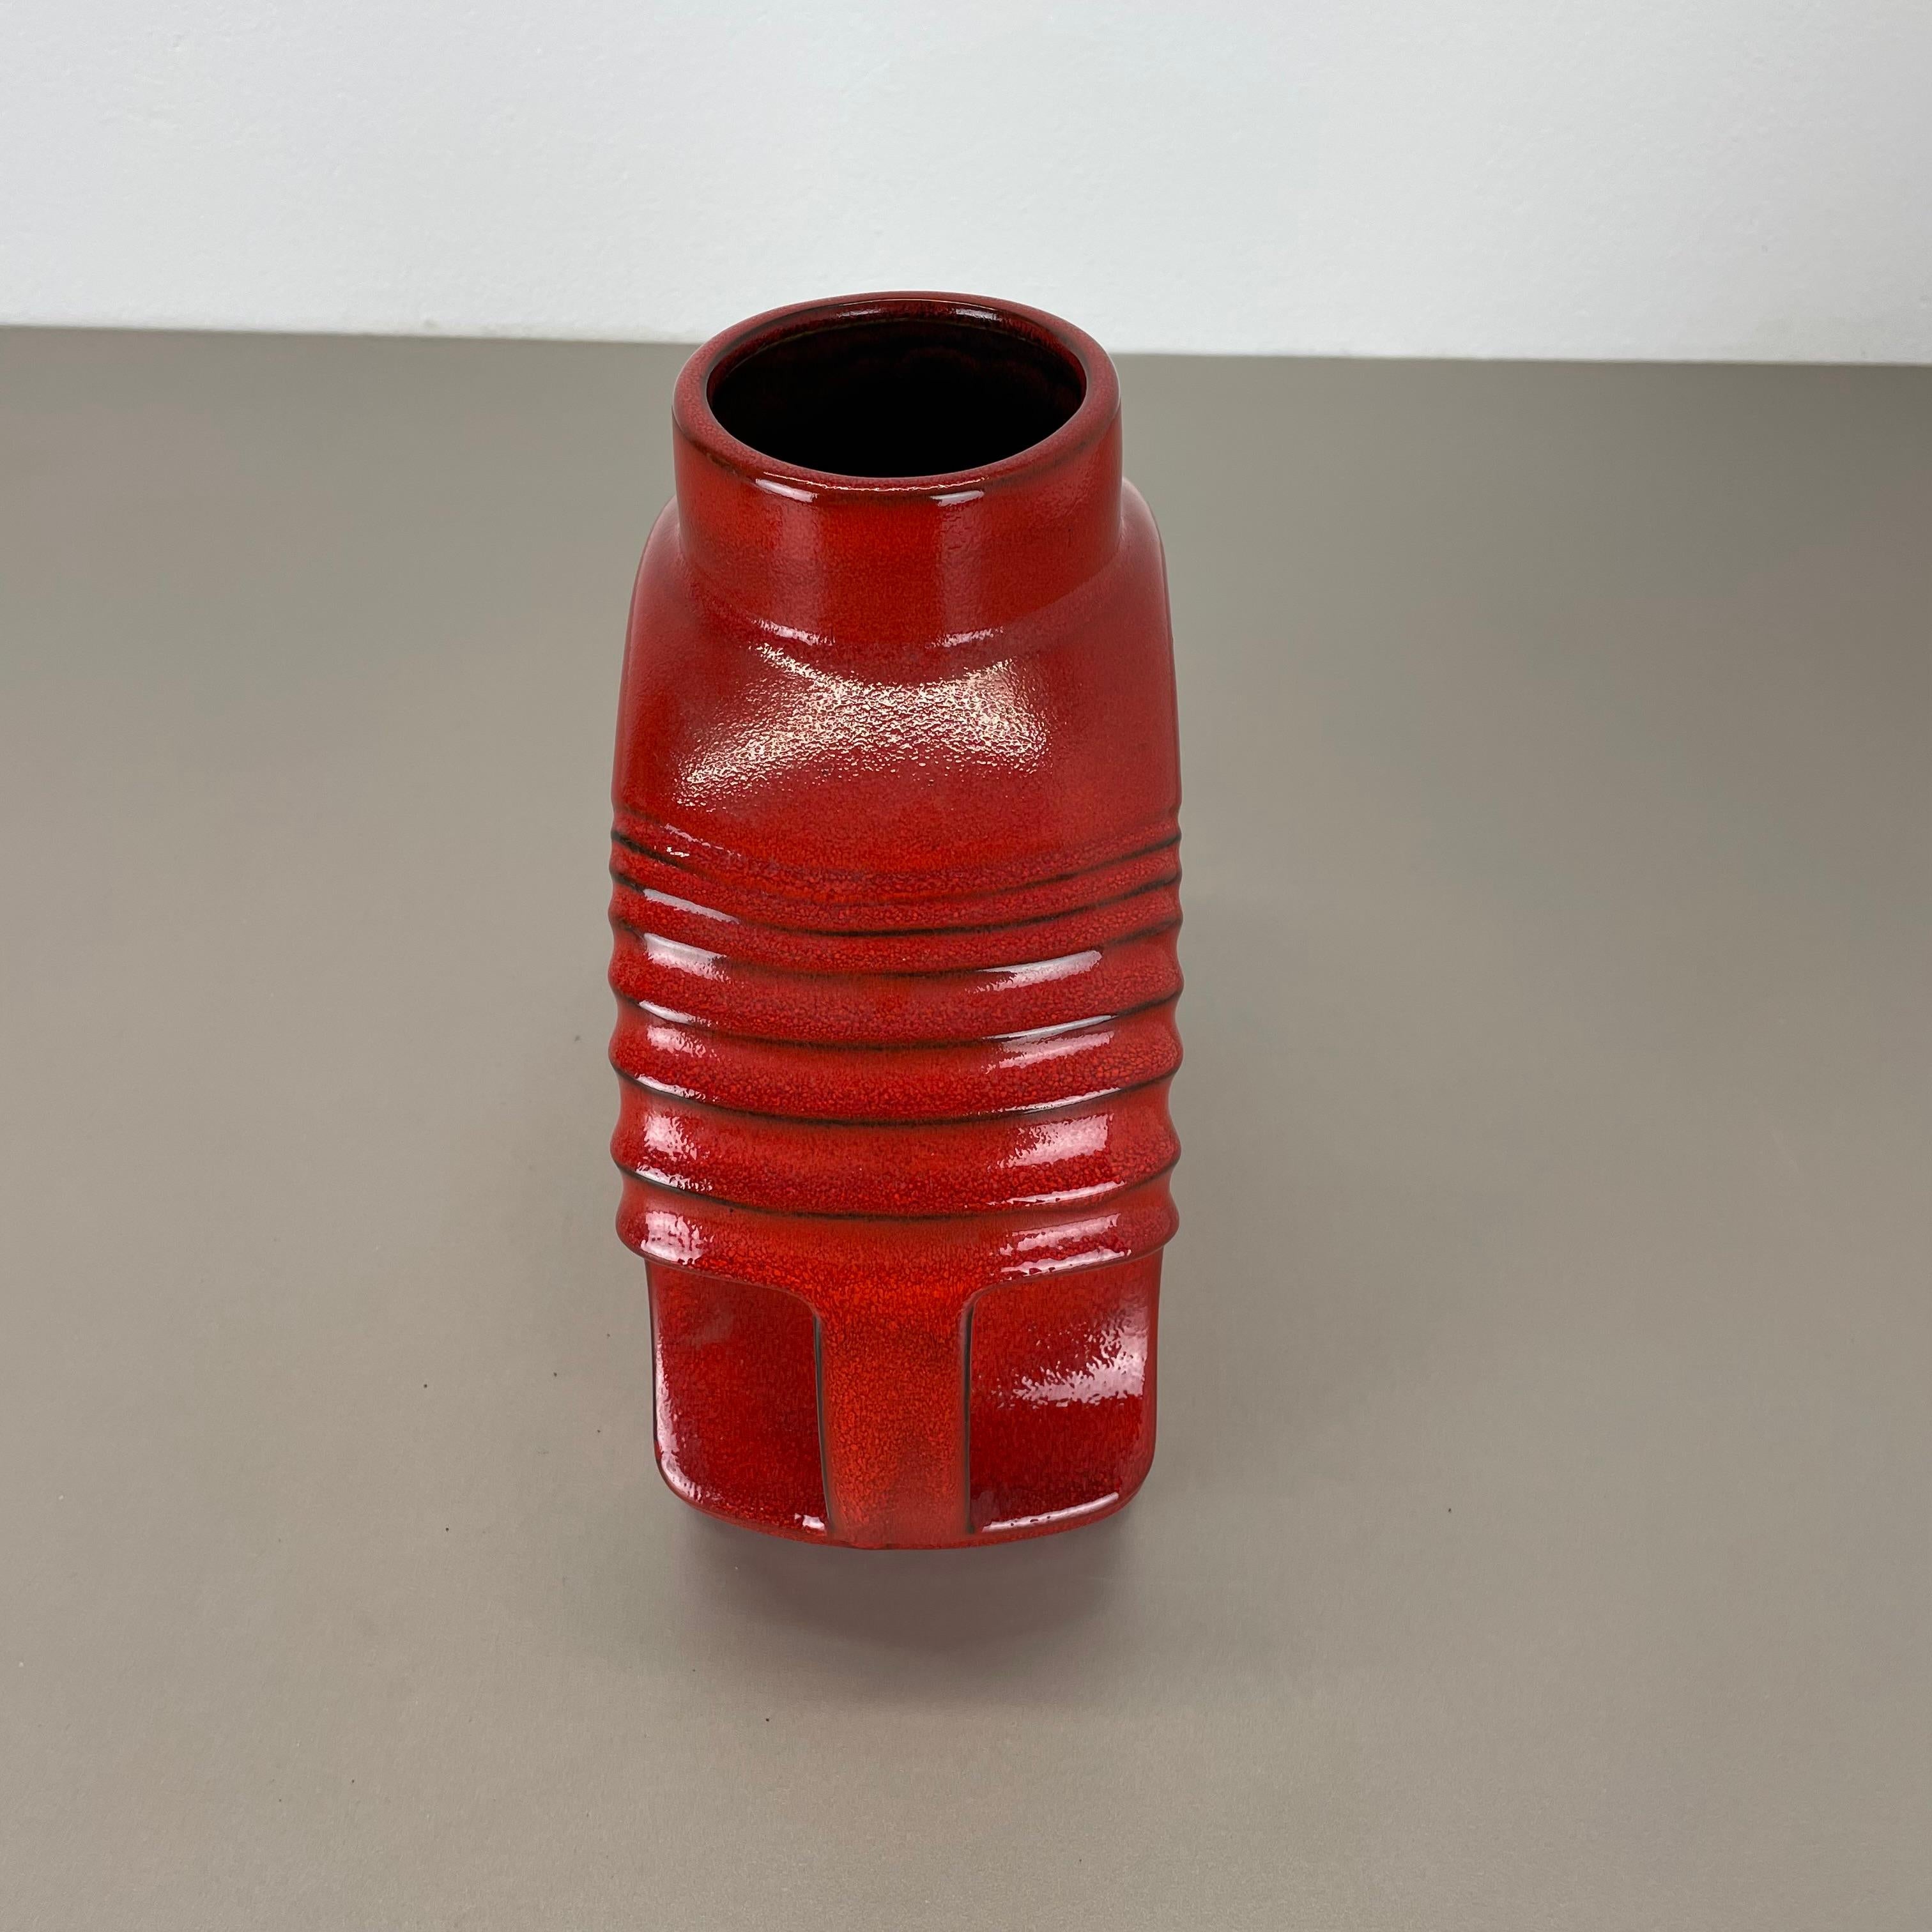 Large red abstract vase object by Cari Zalloni for Steuler, Germany, 1970s For Sale 2